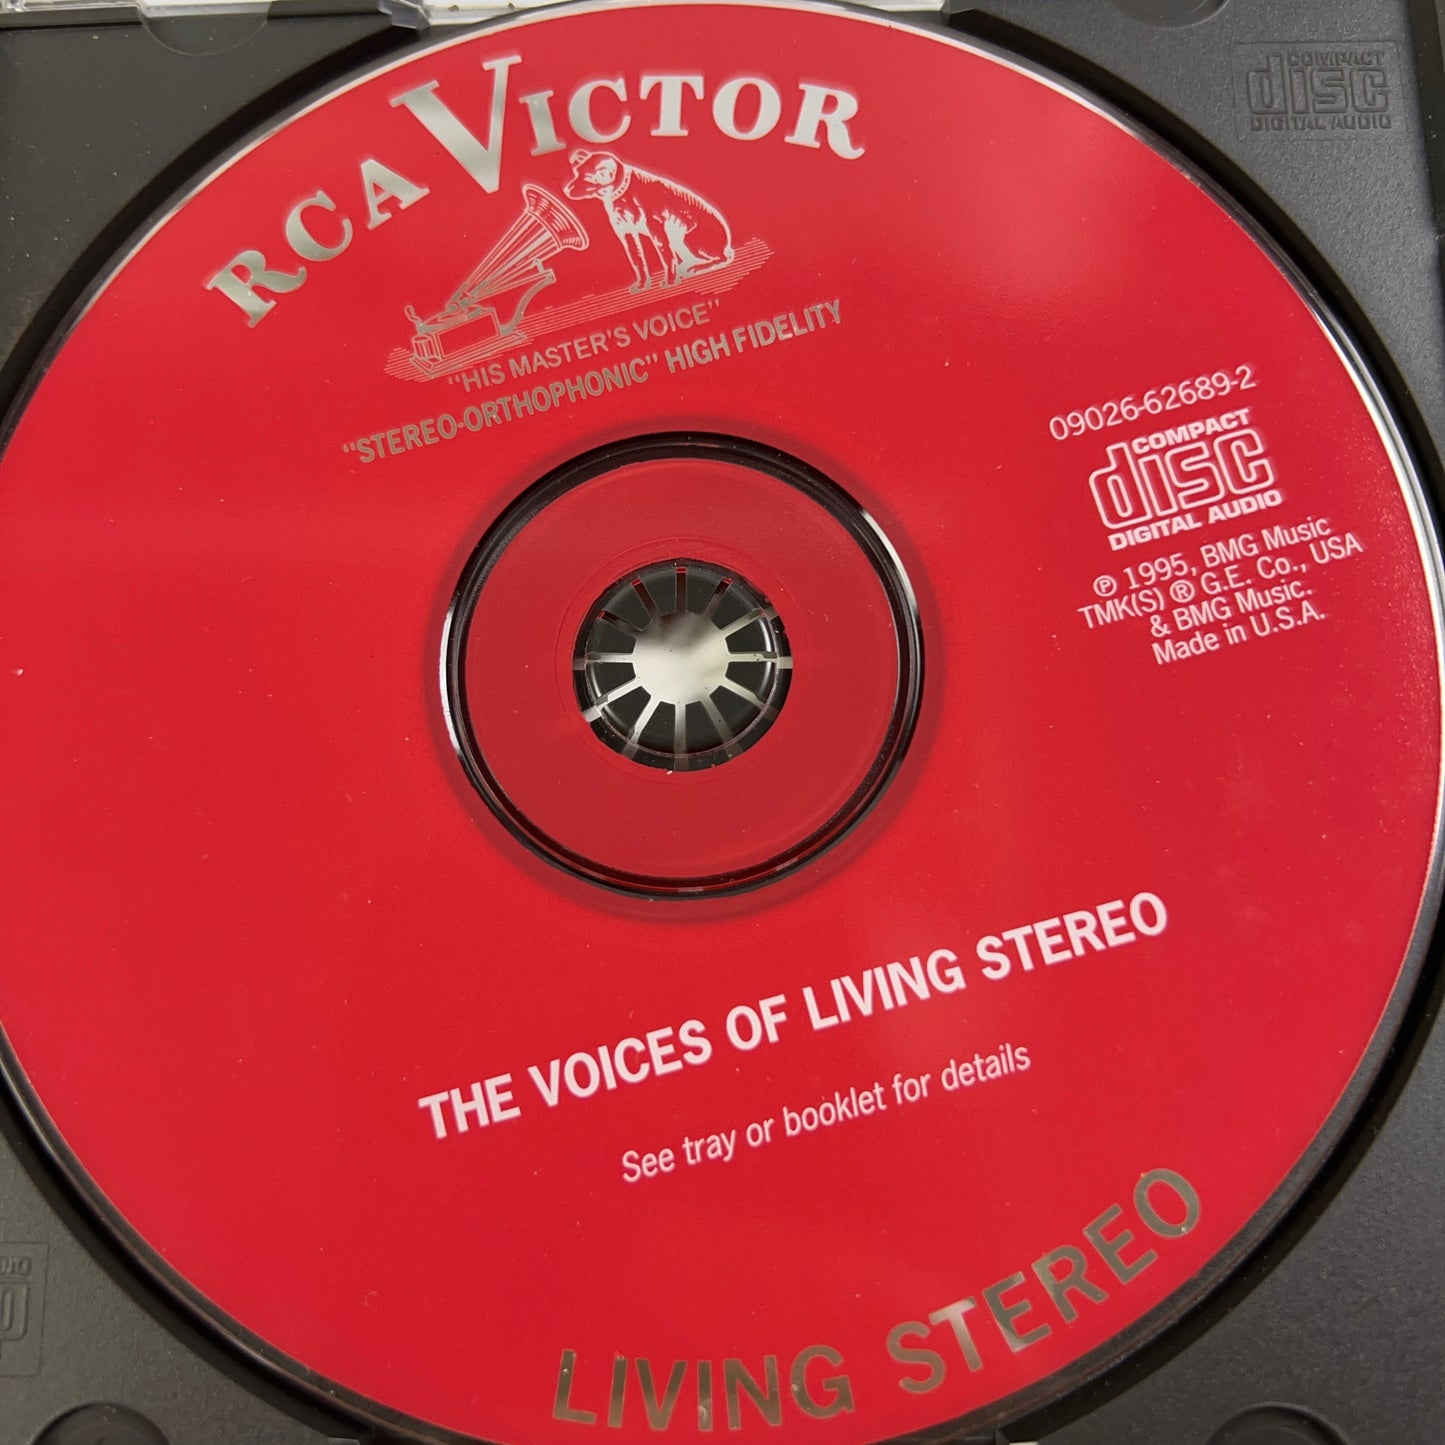 Voices of Living Stereo, Vol. 1 - Audio CD By Leontyne Price